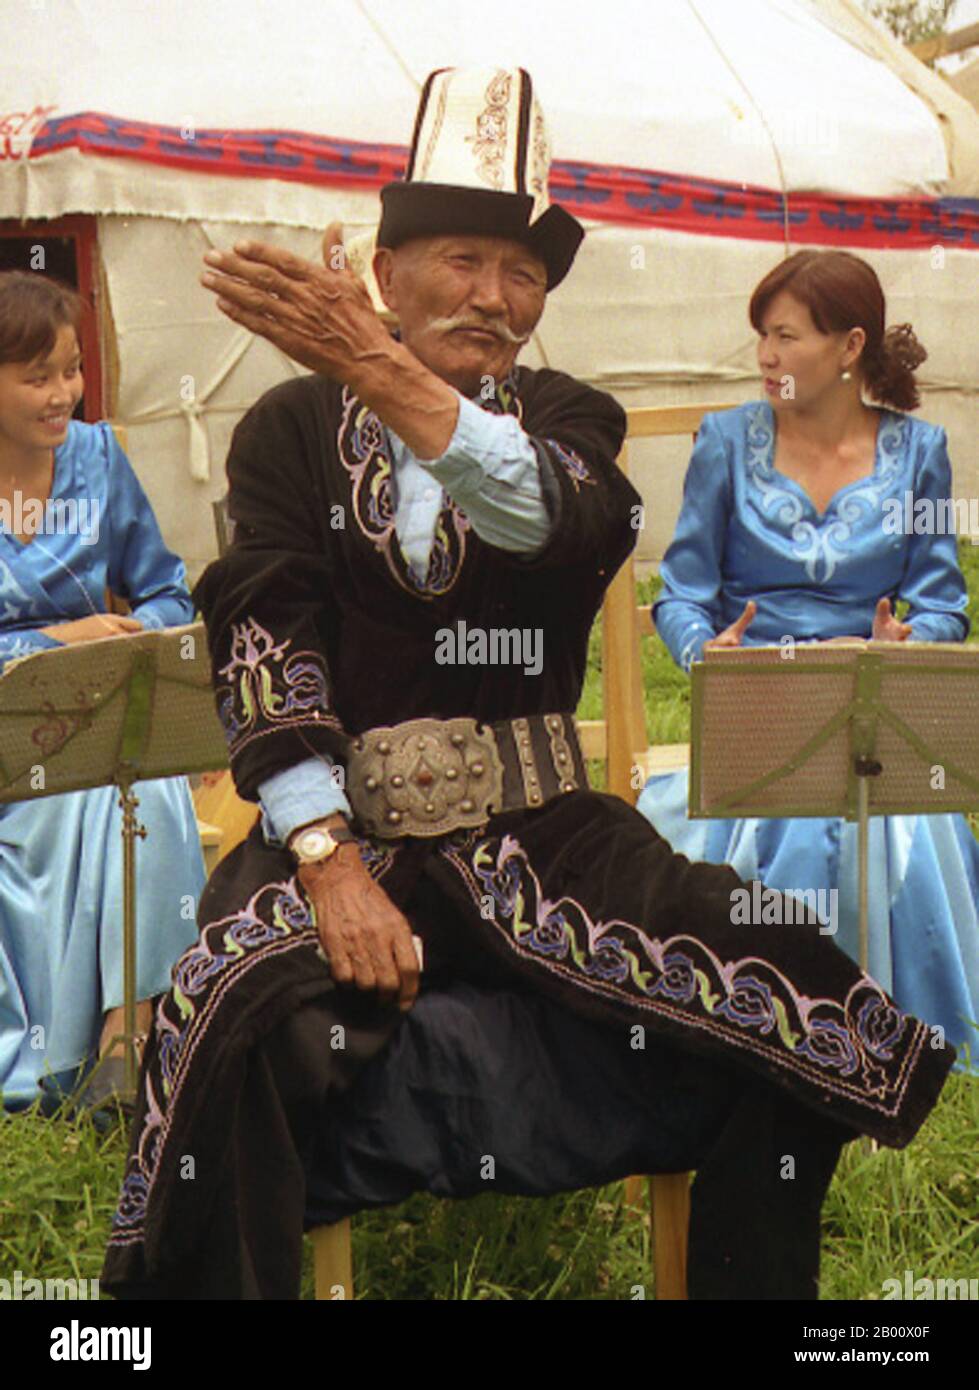 Kyrgyzstan: A Kyrgyz man dressed in traditional clothing and wearing a traditional Kalpak hat.  The central figure is a Manaschi, a traditional storyteller who has memorised the entire Manas epic legend. Public Domain image by Simon Garbutt. Stock Photo